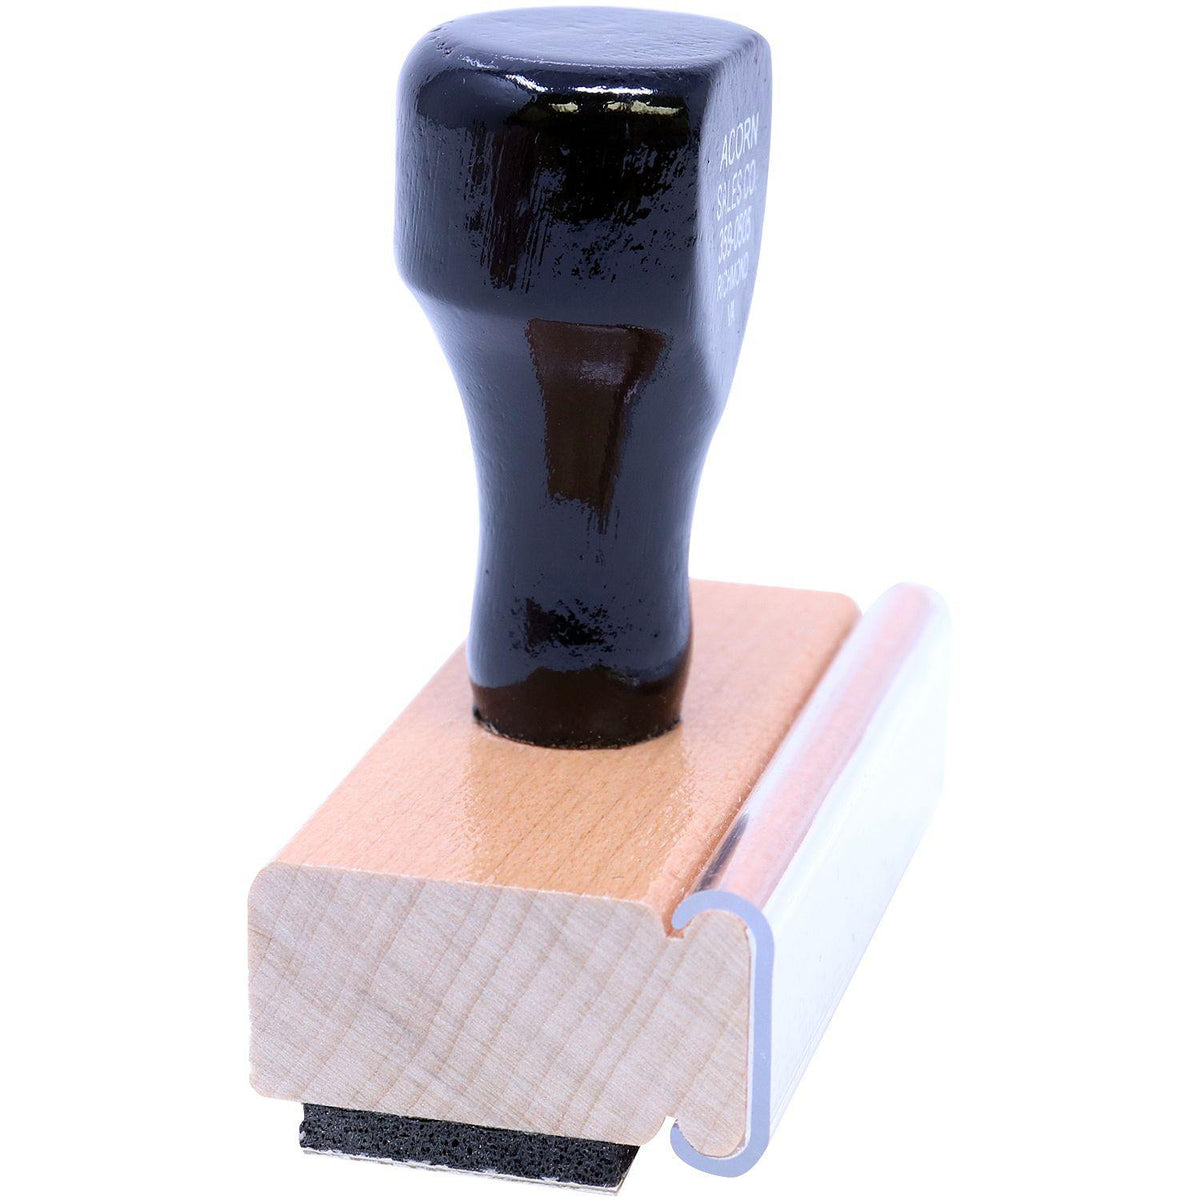 Side View of Large Please Correct Rubber Stamp at an Angle